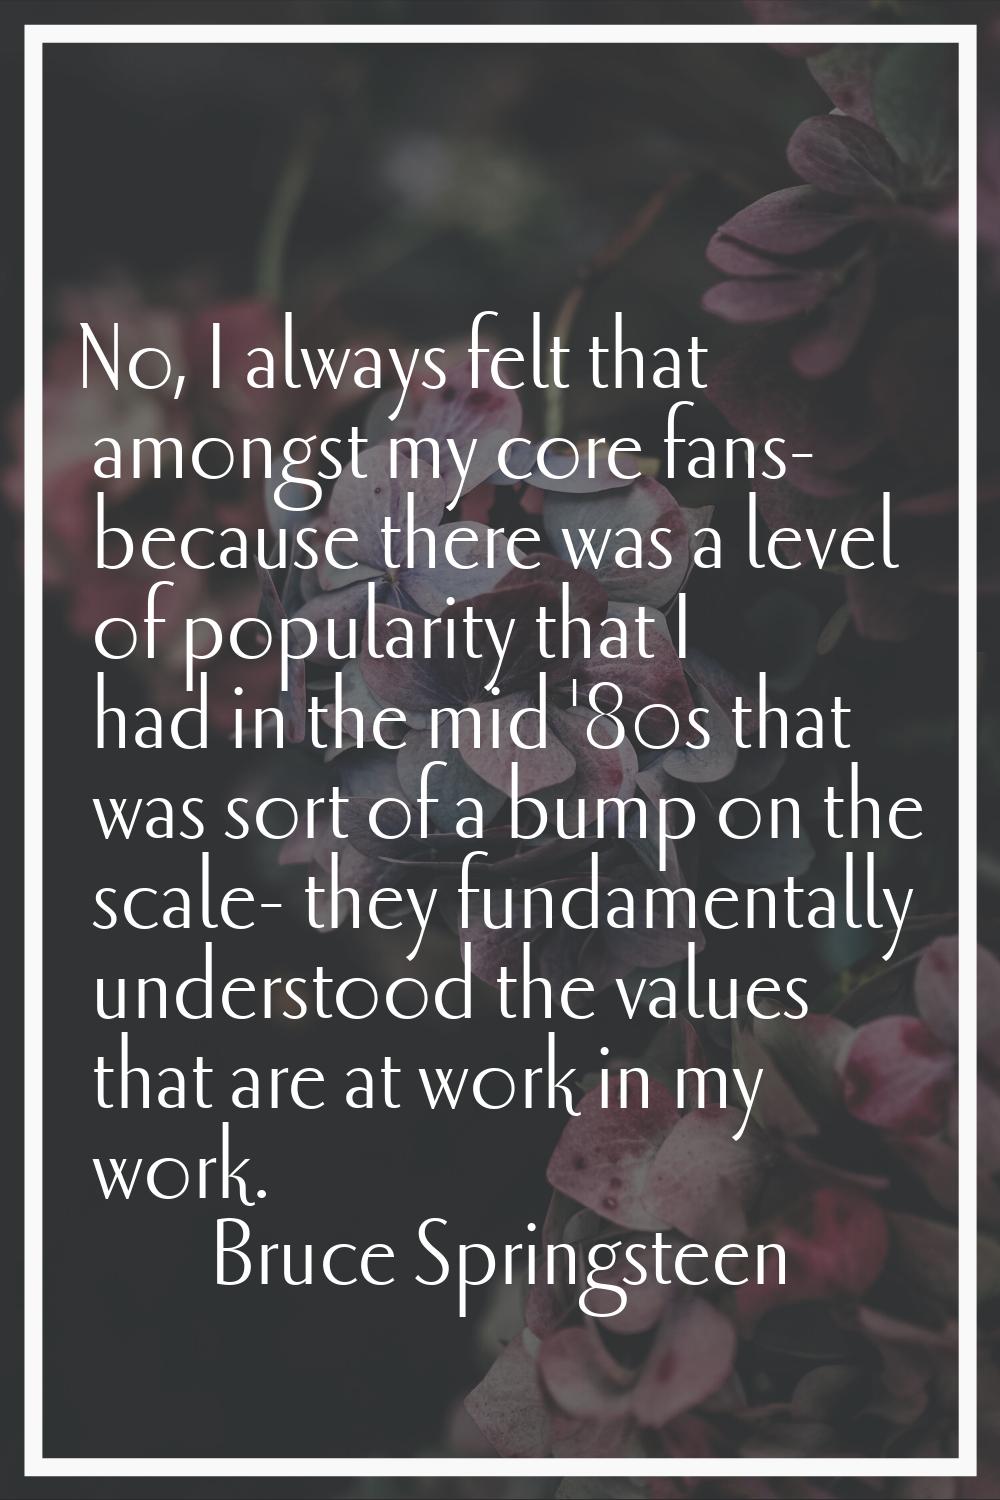 No, I always felt that amongst my core fans- because there was a level of popularity that I had in 